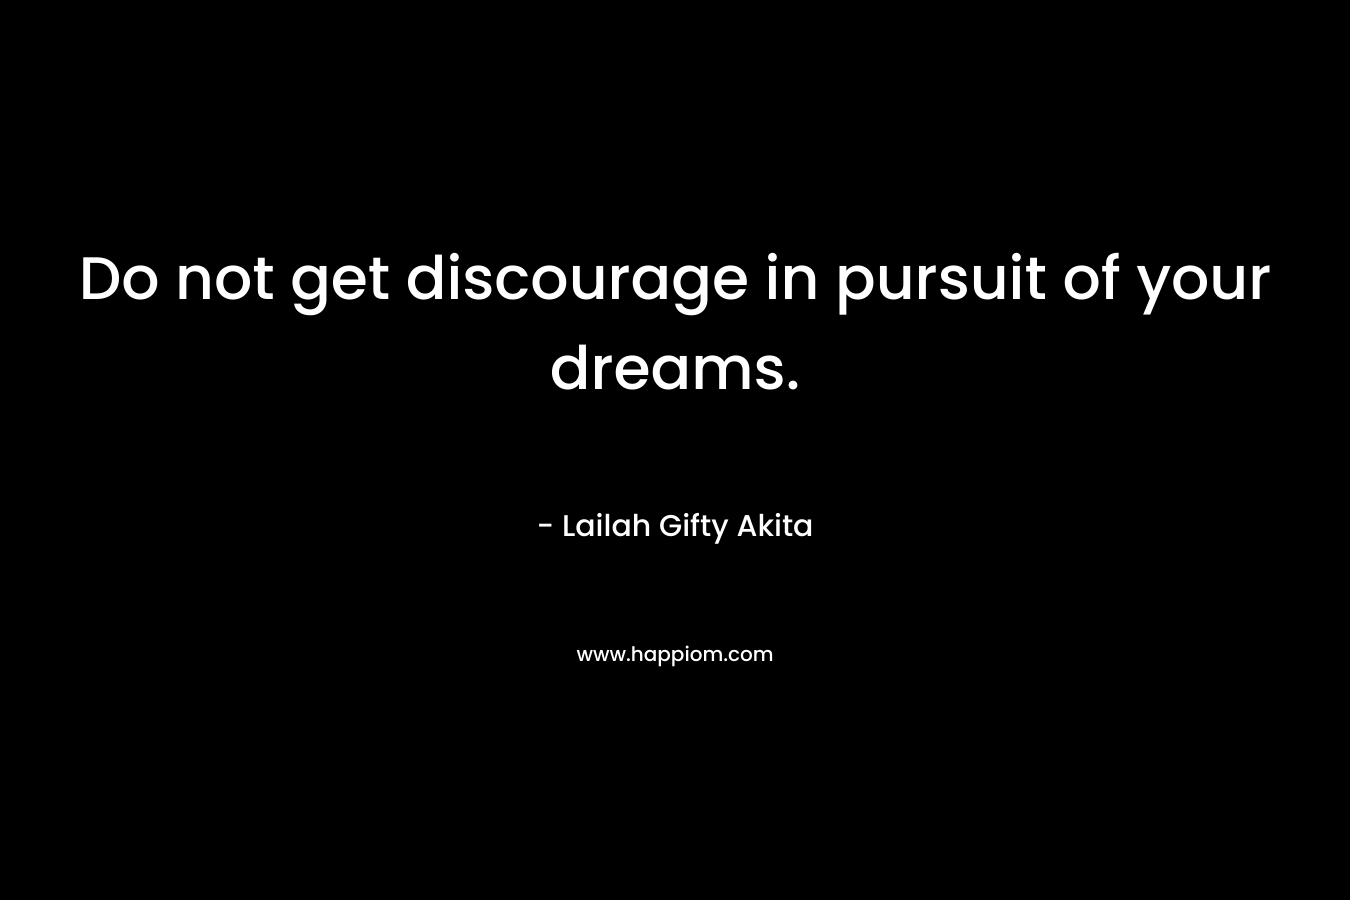 Do not get discourage in pursuit of your dreams.